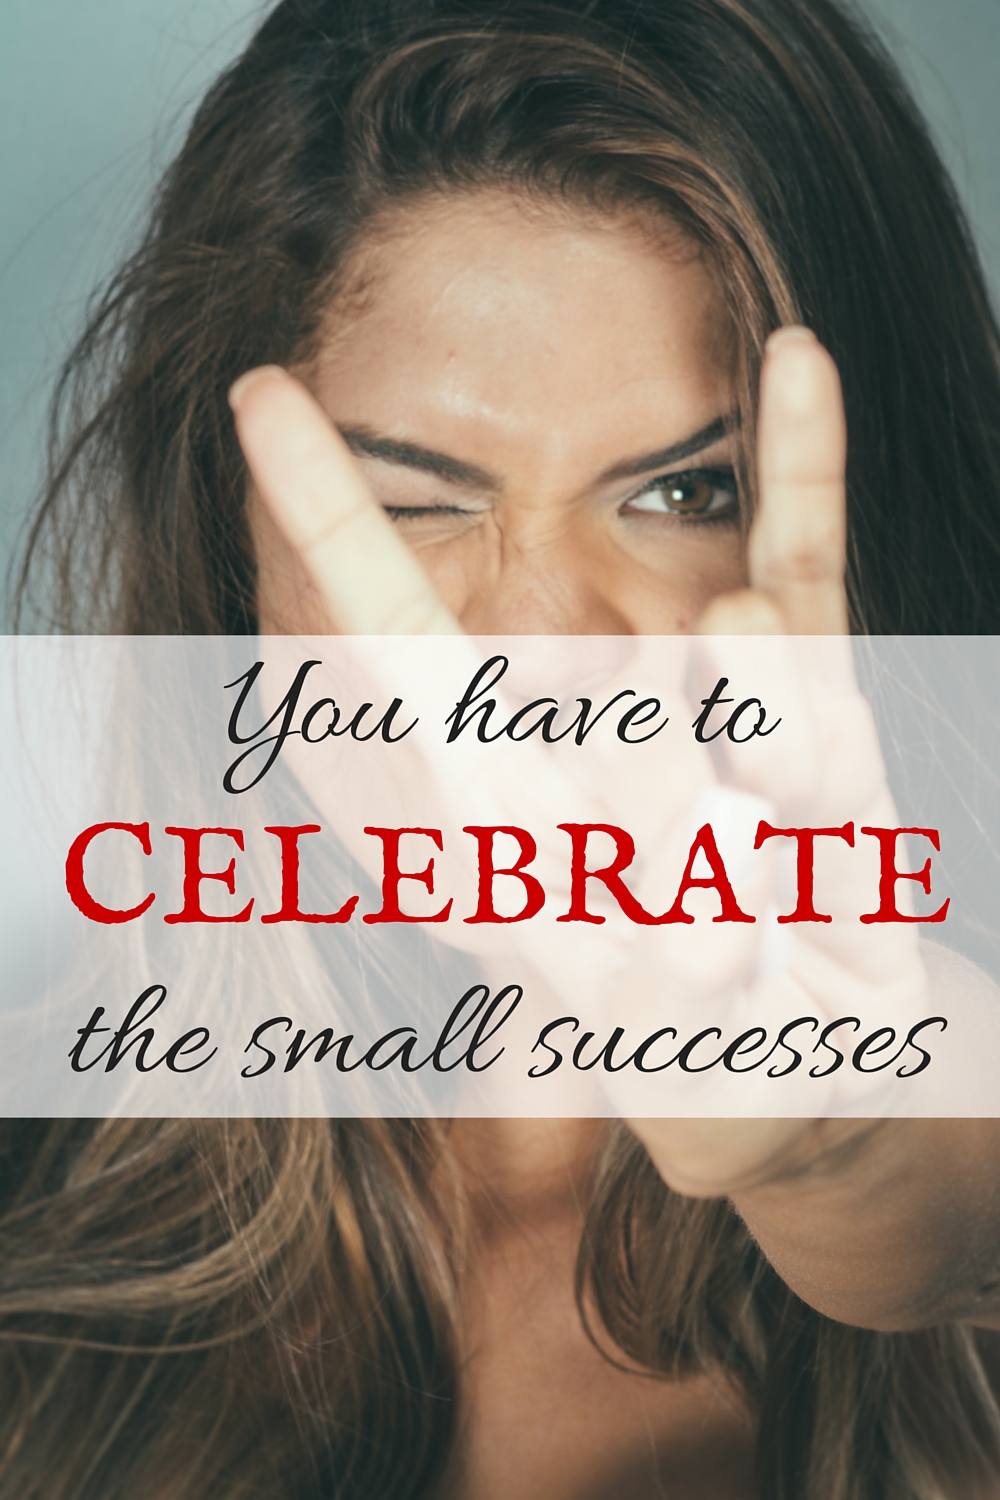 A good reminder not to forget the small victories!